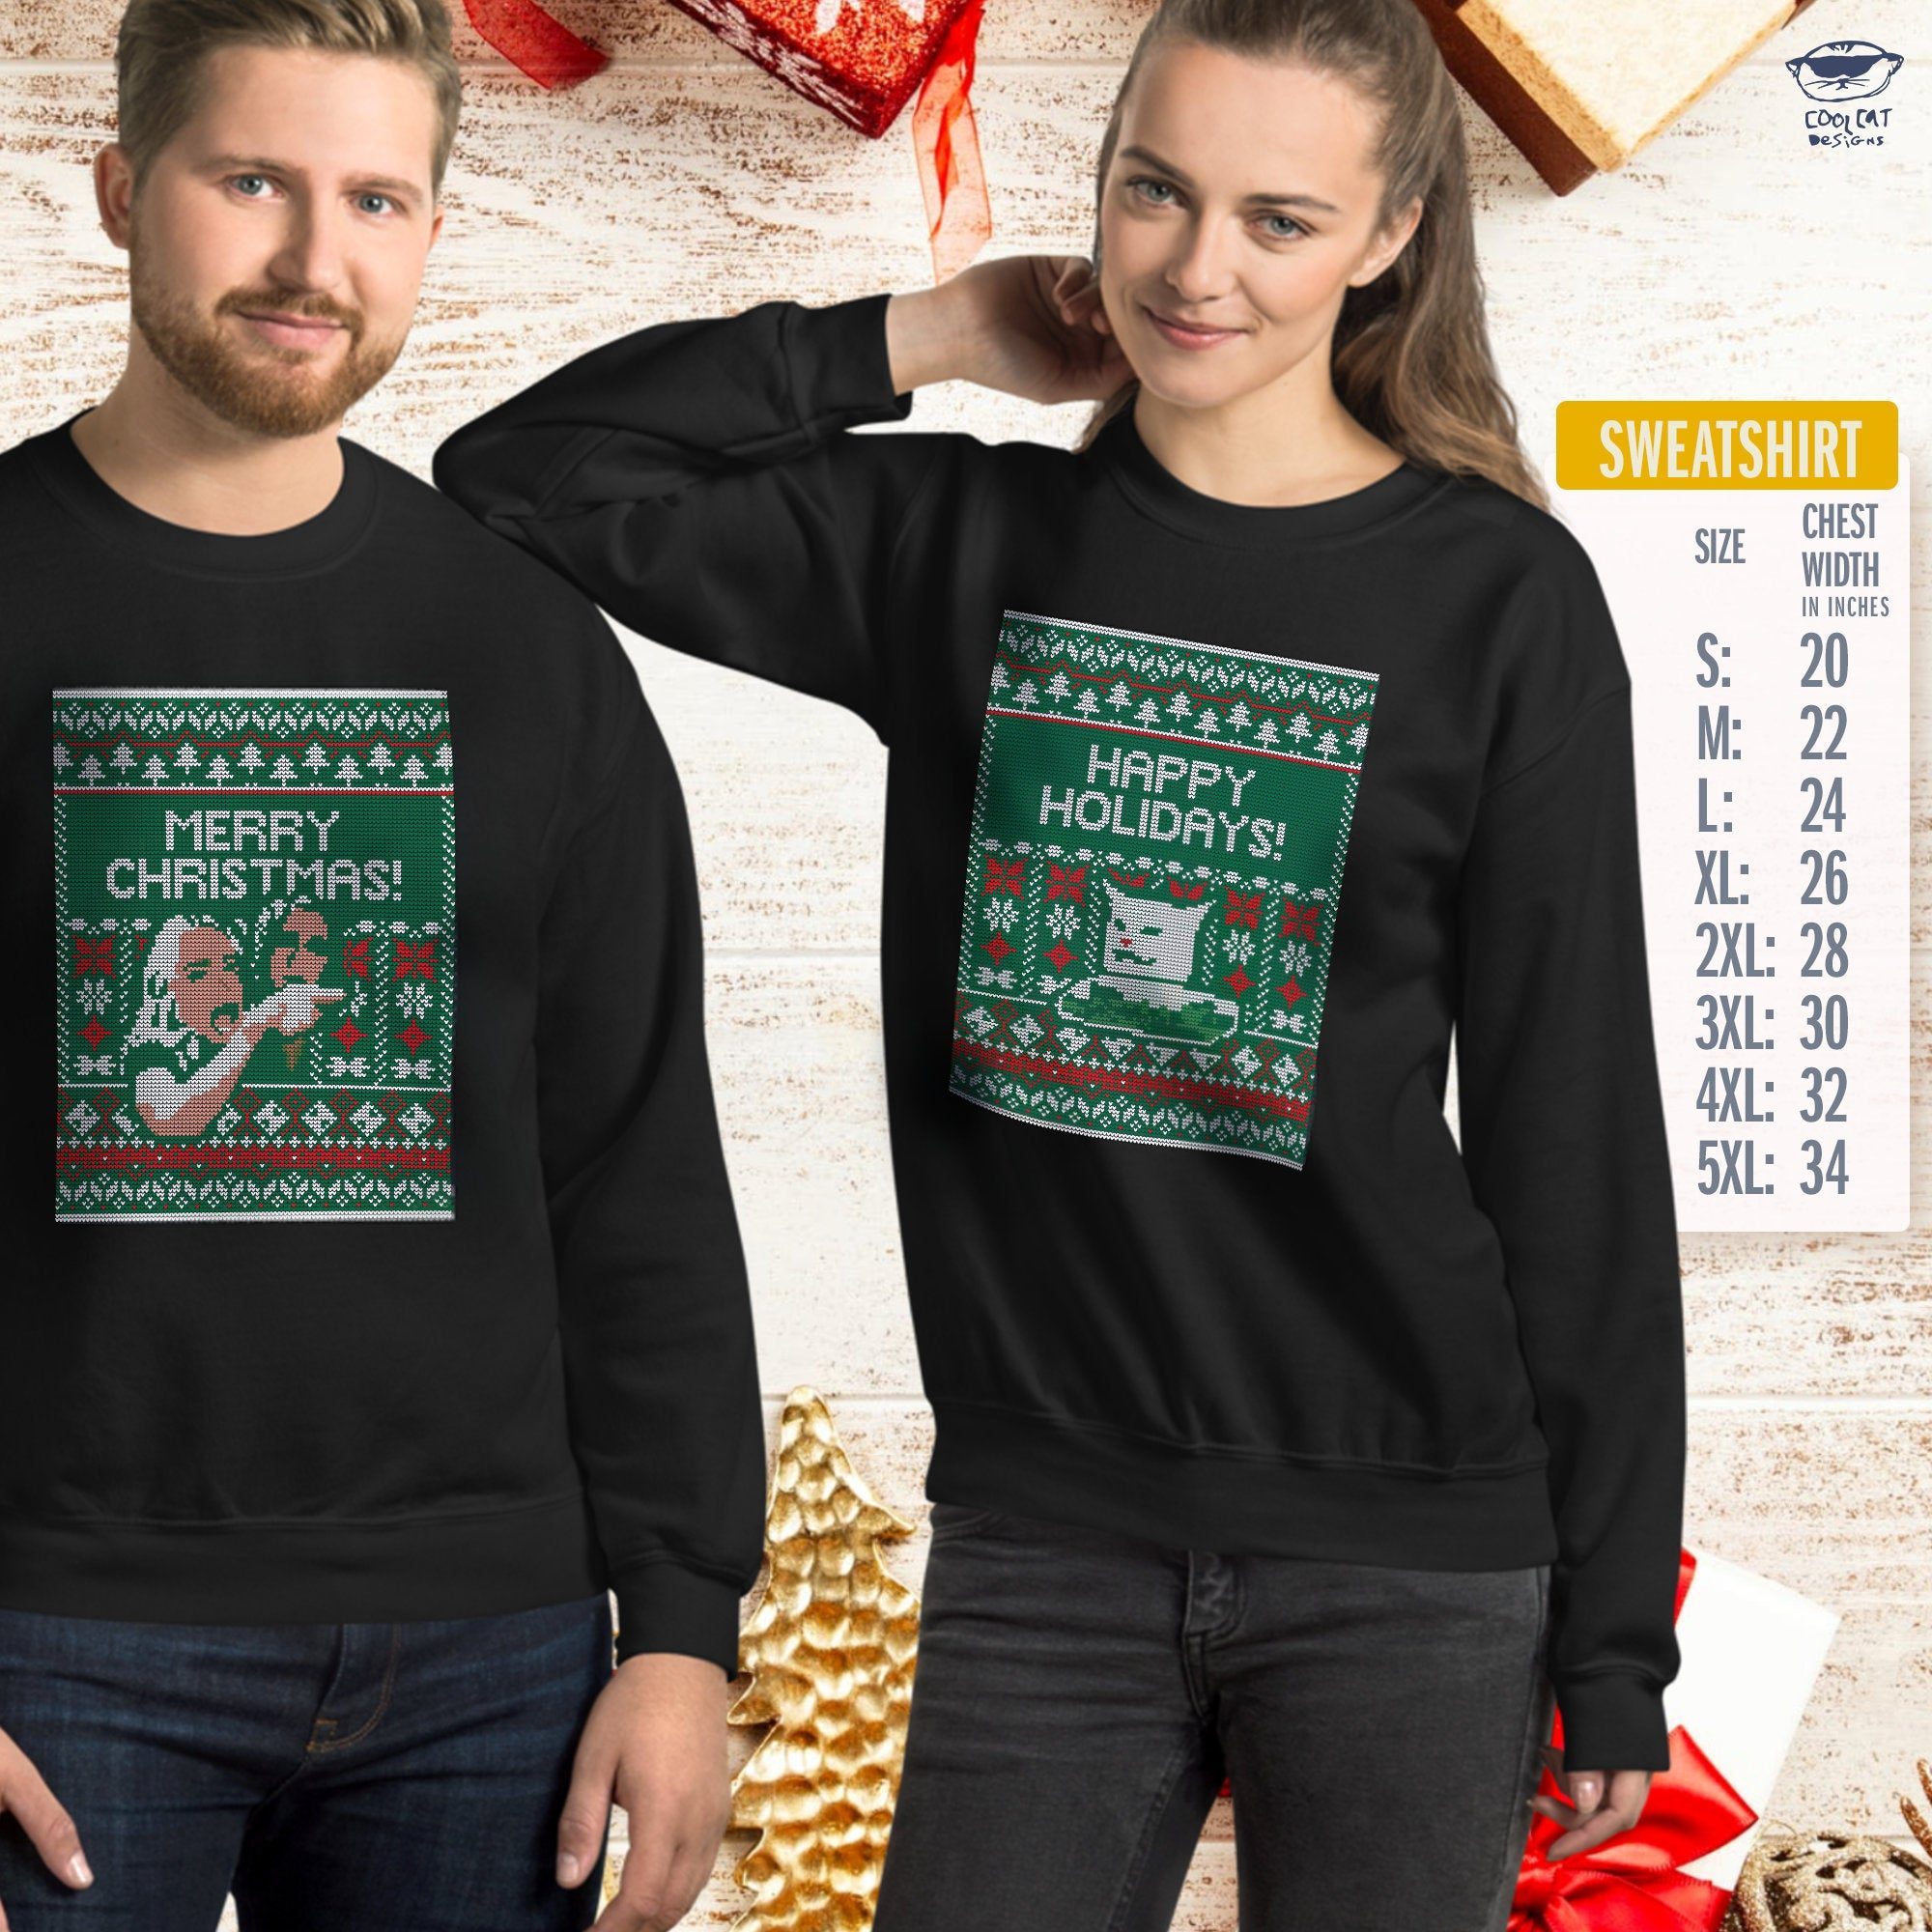 Woman Yelling at Cat Meme Ugly Christmas Sweater Faux ...